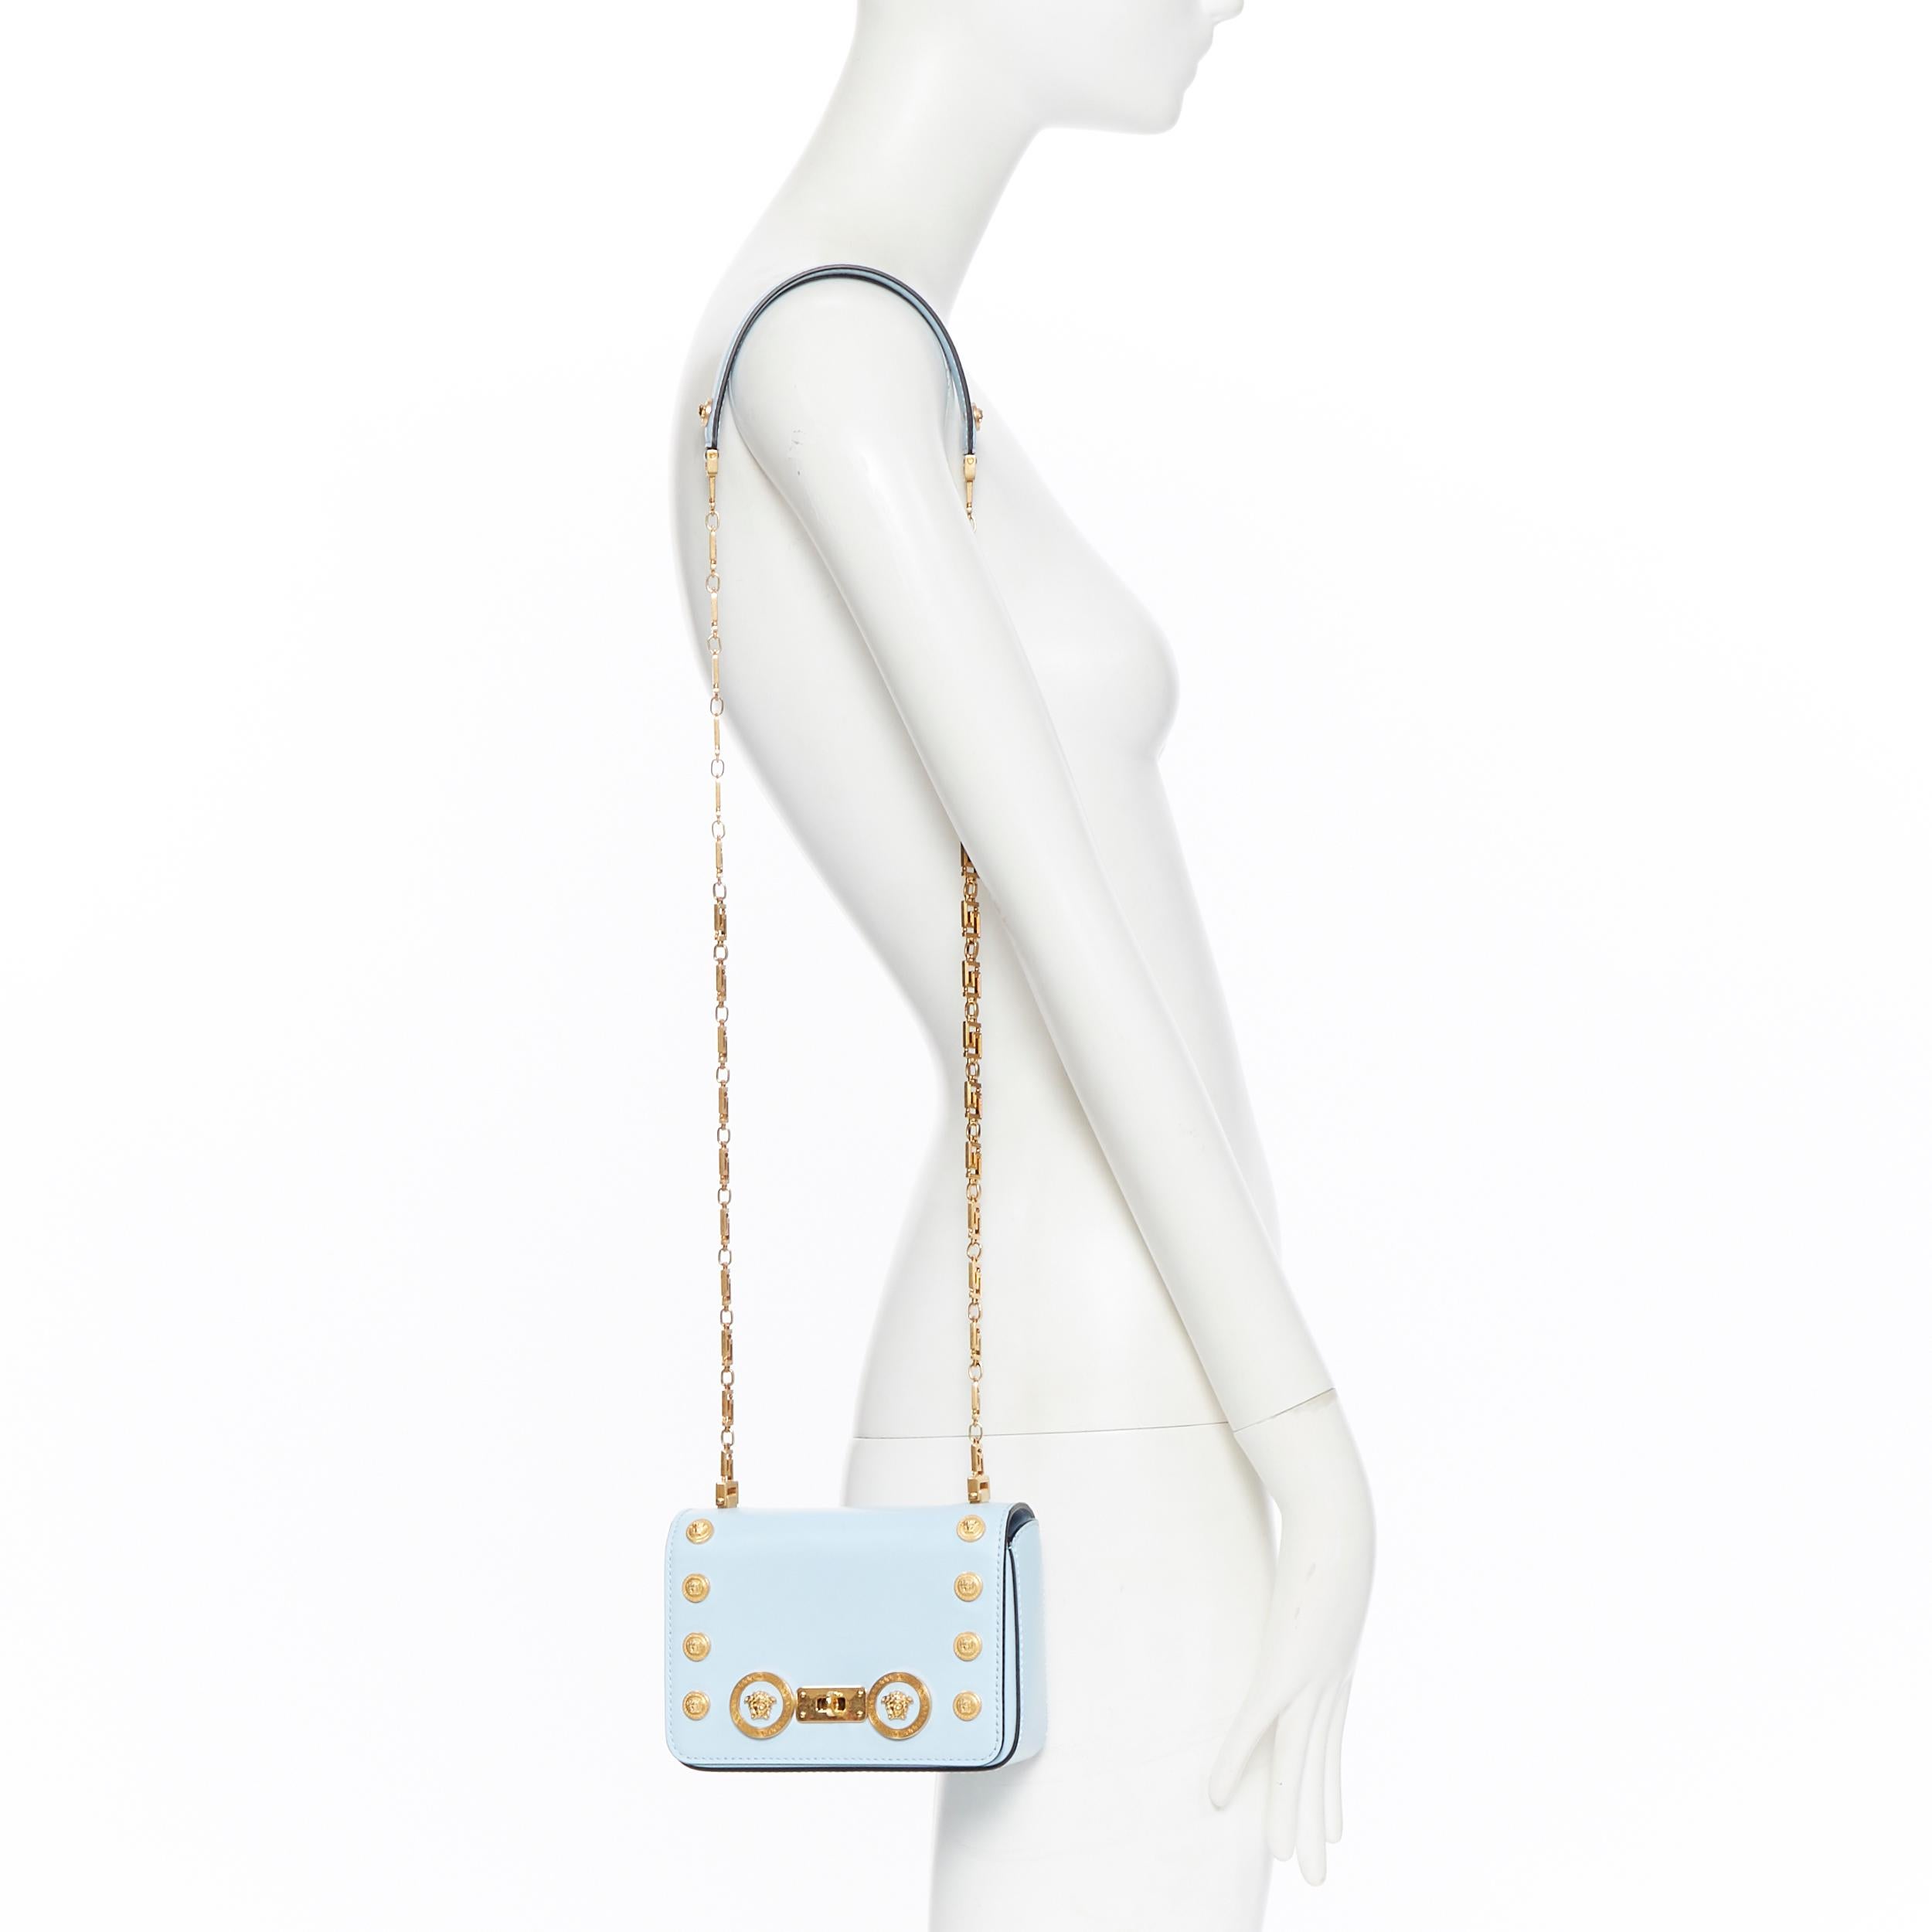 new VERSACE Tribute Icon sky blue gold Medusa turnlock greca chain flap bag
Brand: Versace
Designer: Donatella Versace
Collection: 2018
Model Name / Style: Icon bag
Material: Leather; calf leather
Color: Blue; sky blue
Pattern: Solid
Closure: